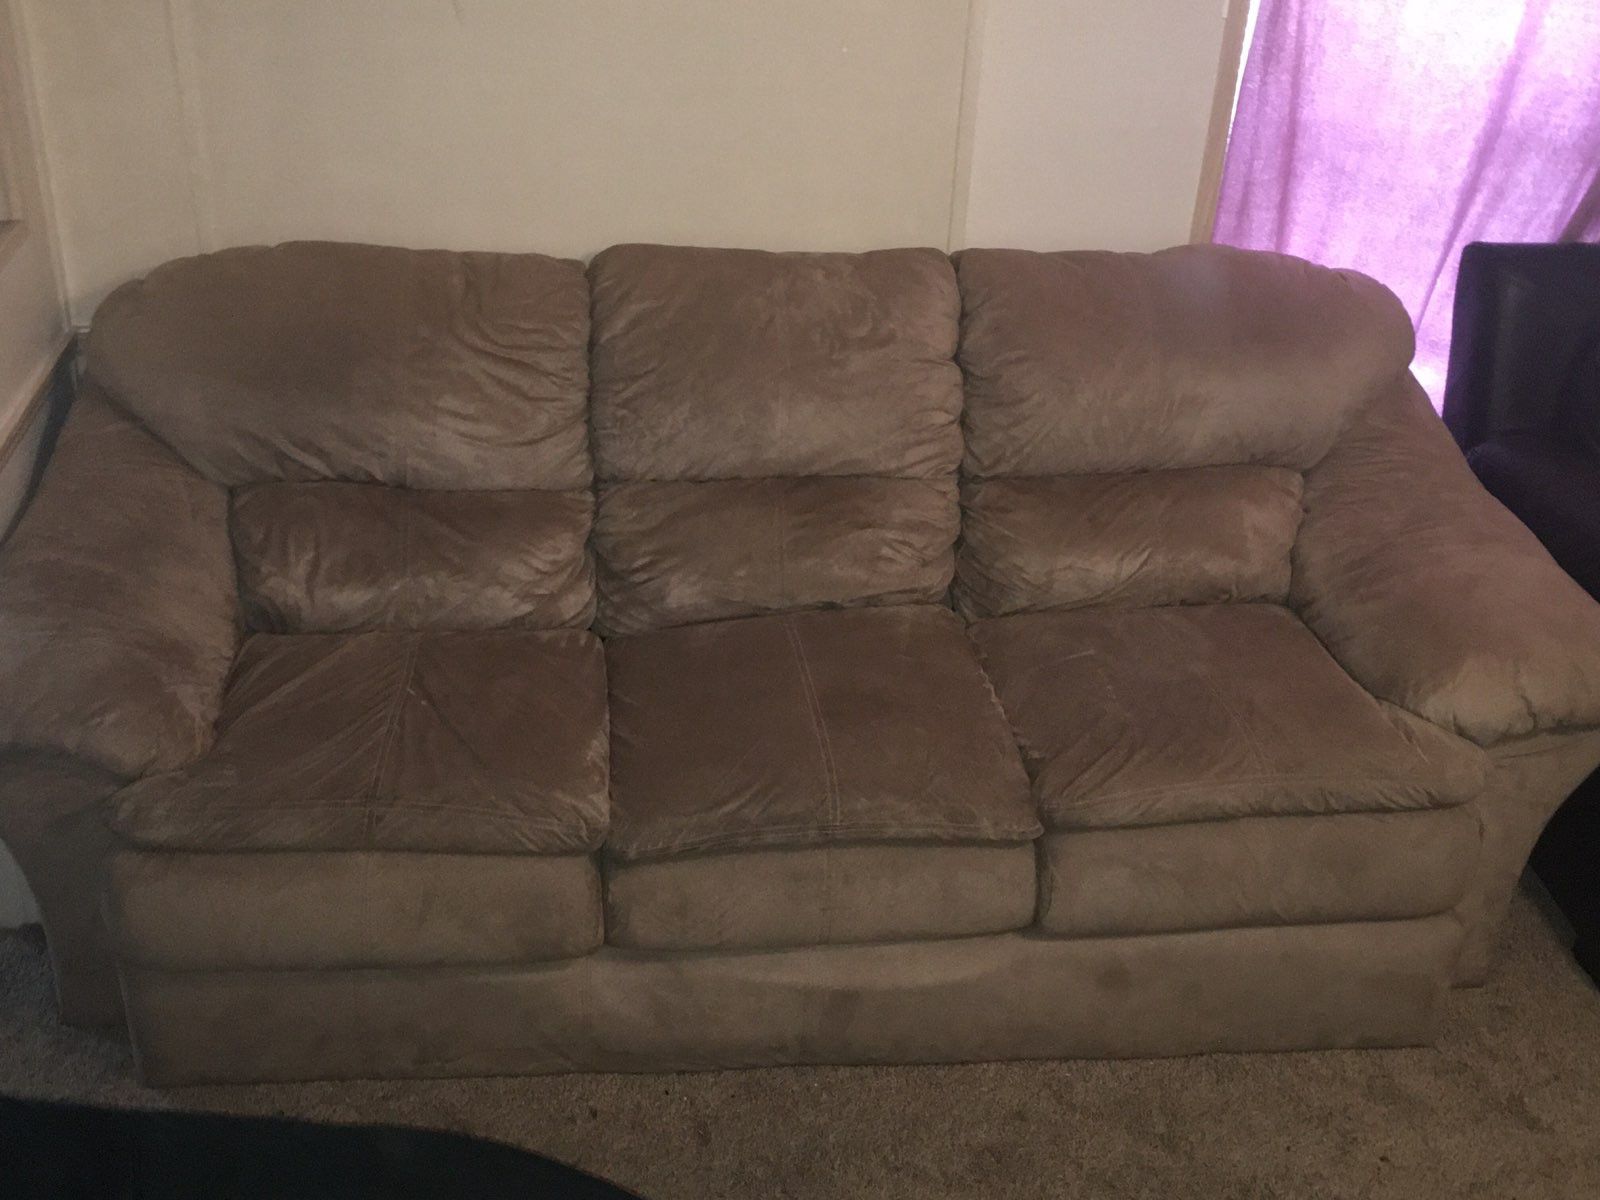 Comfortable, soft, brown couch